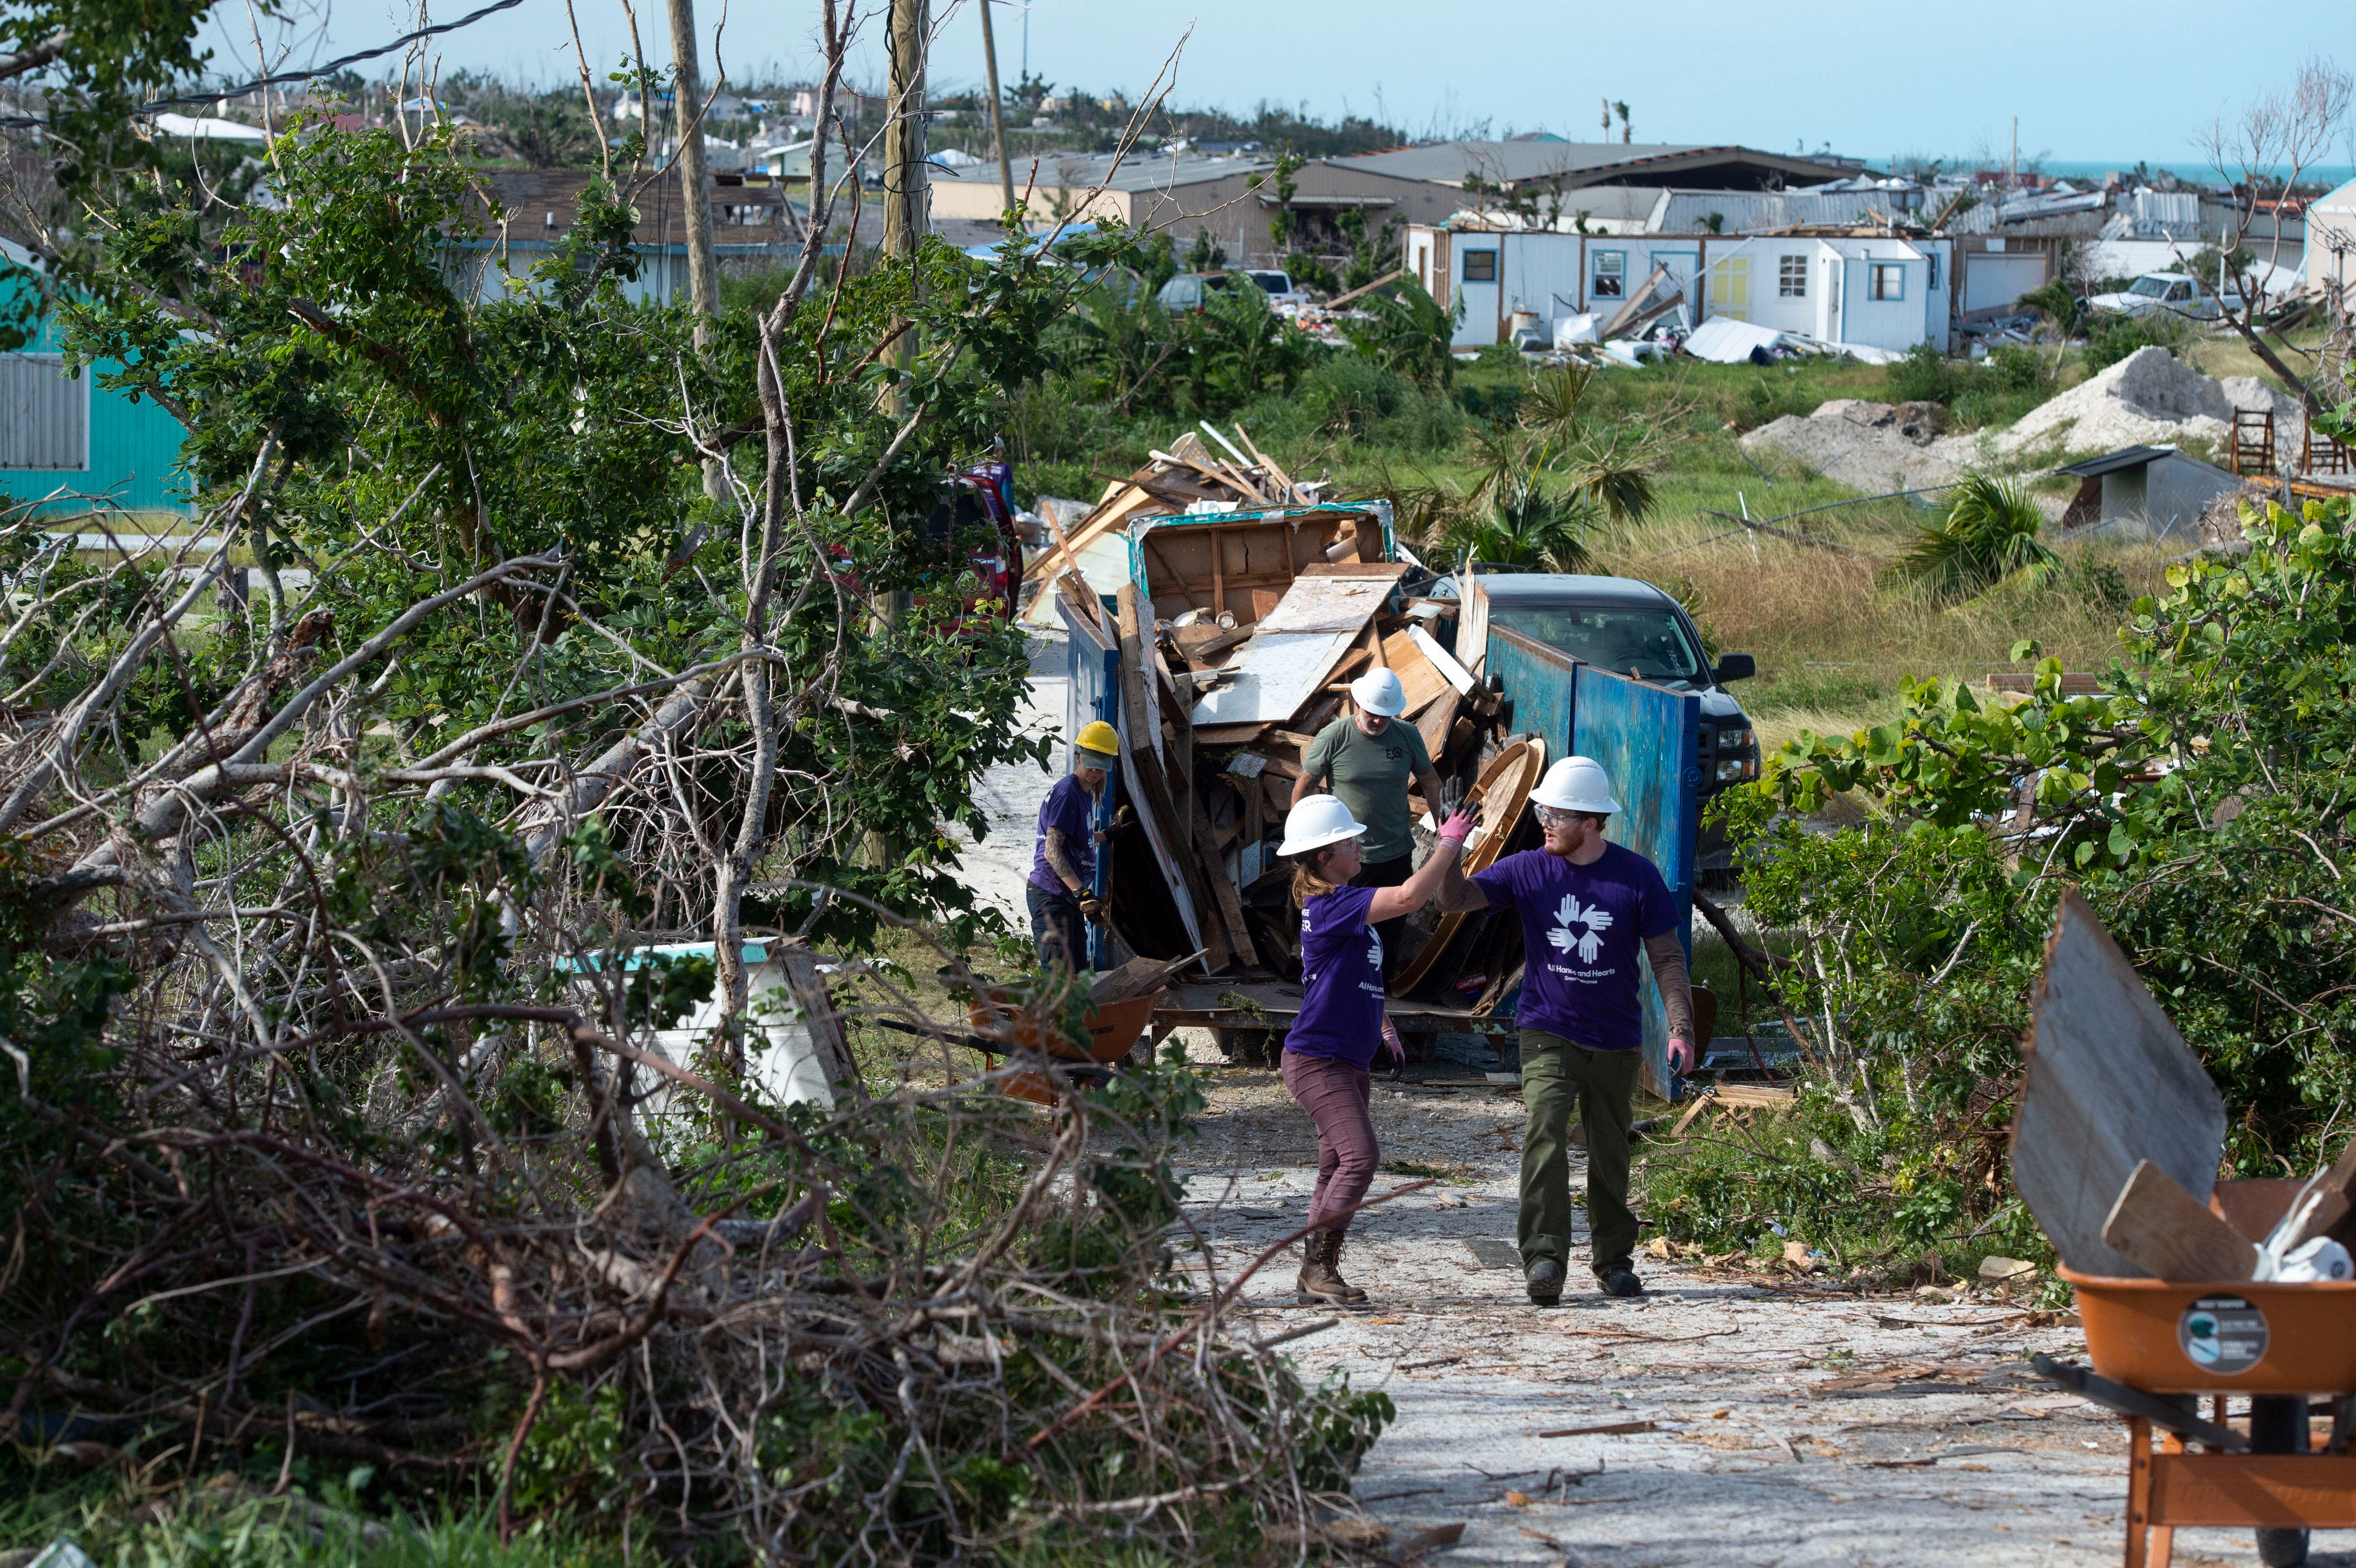 All Hands and Hearts Smart Response volunteers Corynn Benoit (left) and Ryan Ahlberg, both of Salt Lake City, Utah, high five as they remove debris scattered by Hurricane Dorian from a residential property Saturday, Dec. 21, 2019, in Marsh Harbour, Bahamas. The international nonprofit has worked alongside Vero Beach-based Youth on a Mission to clear debris, rebuild and roof homes and clean out moldy walls. 